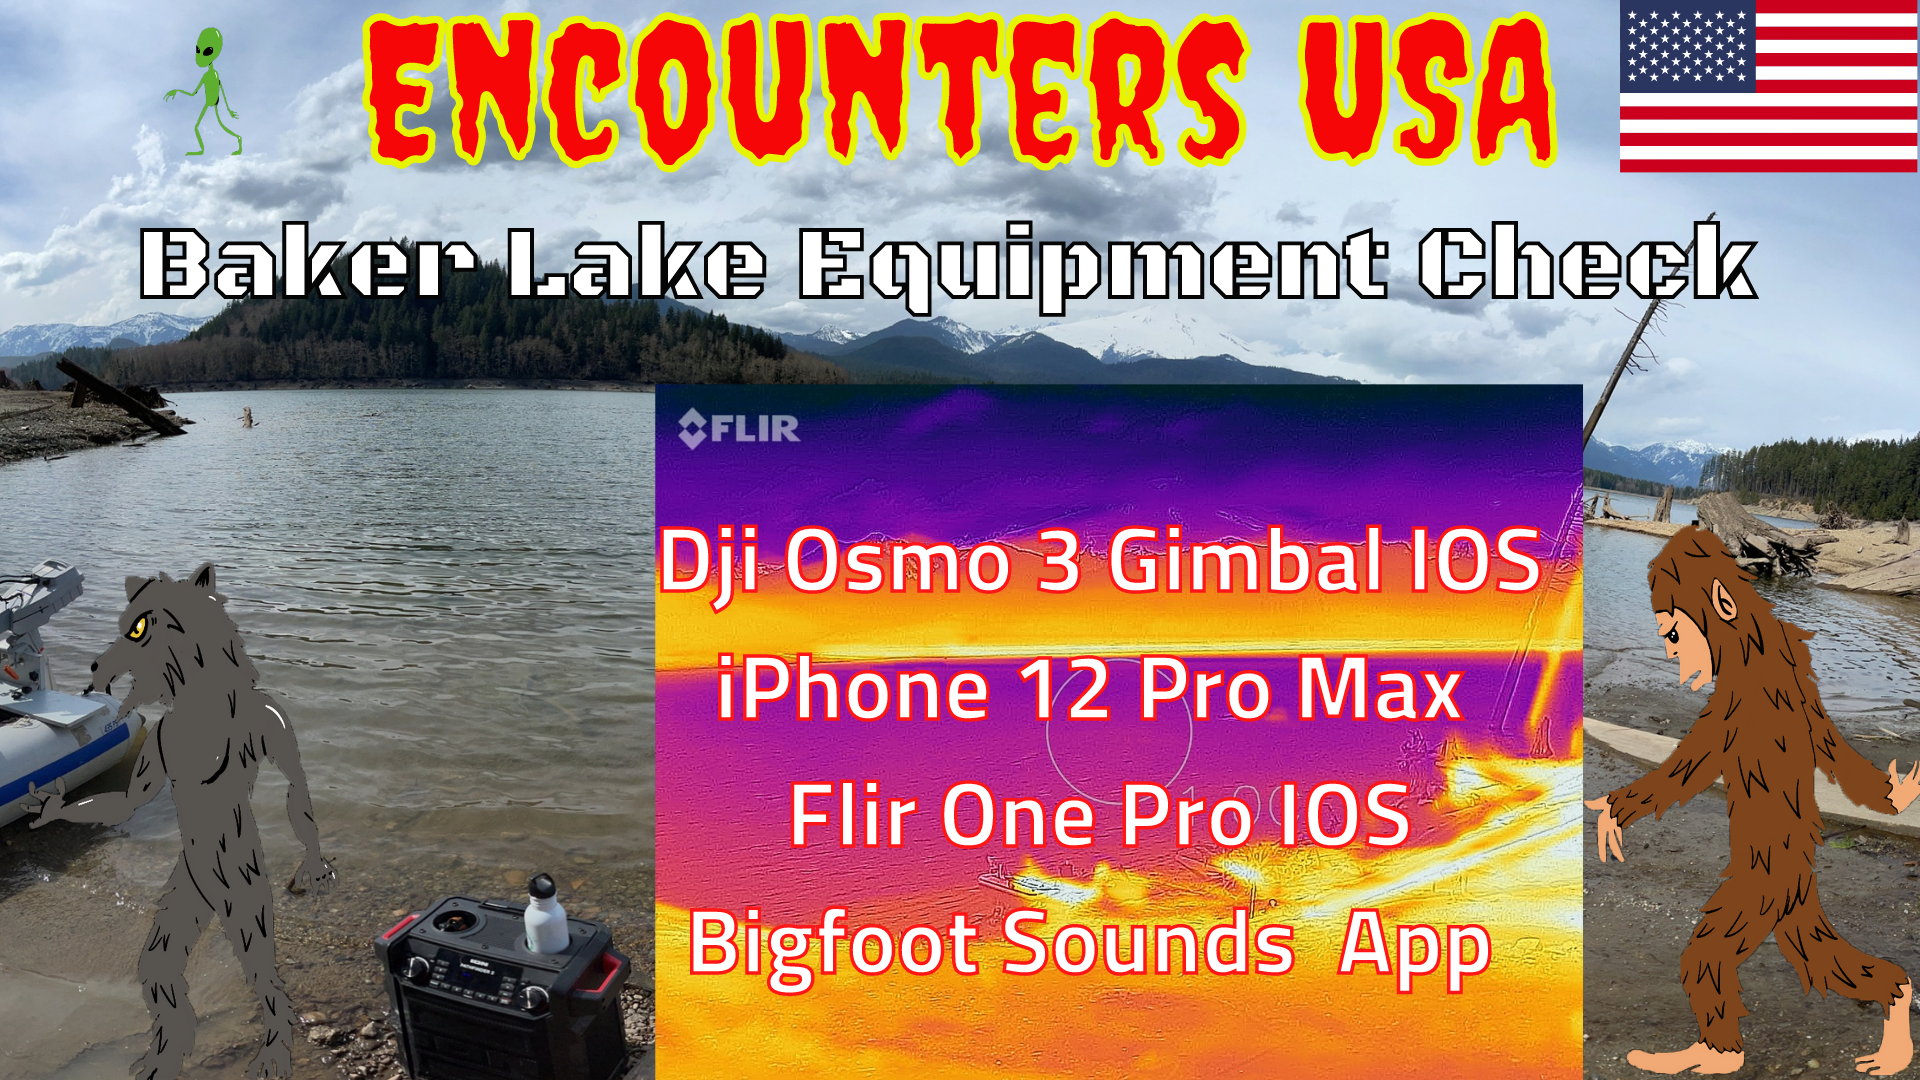 Bigfoot Hunting? Check Out The Latest Equipment On Encounters USA